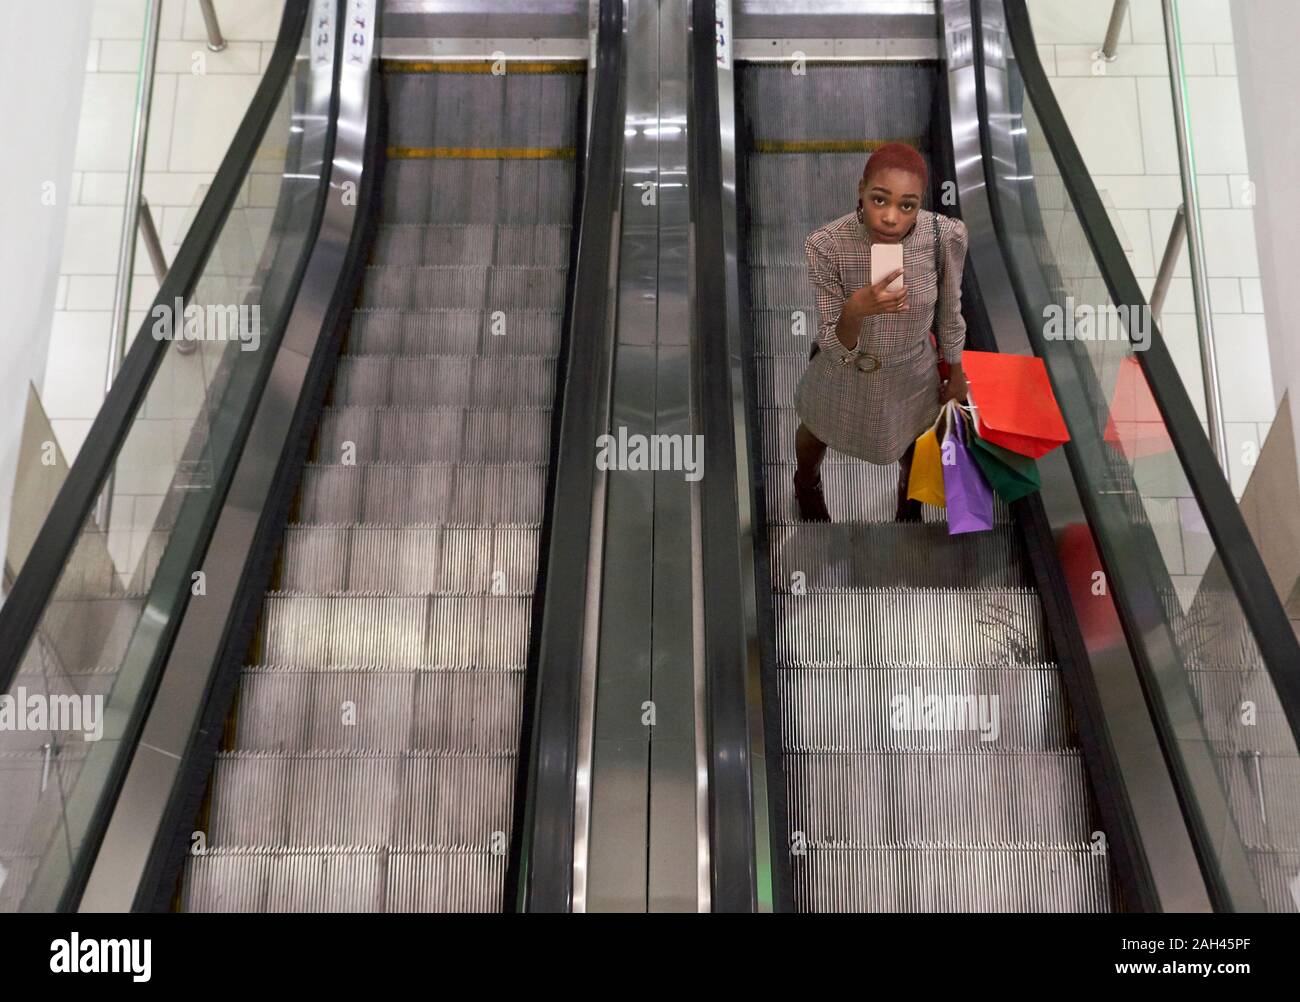 Young woman with holding colorful shopping bags and using her phone while standing on escalator Stock Photo